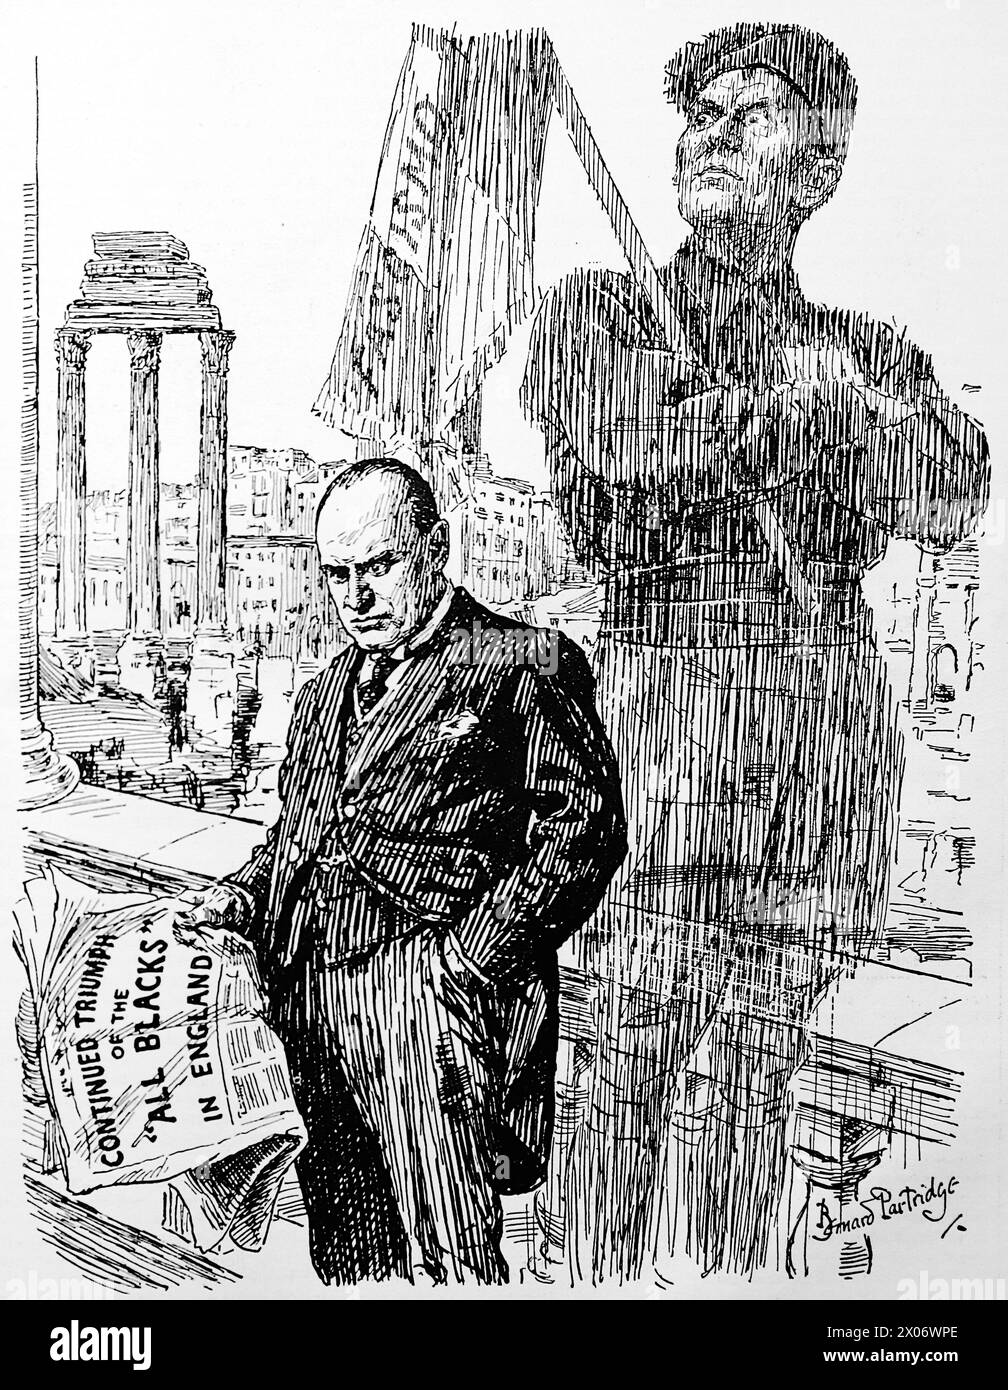 Black Jerseys and Black Shirts by Bernard Partridge, 26 November 1924, showing Mussolini holding a newspaper with reports of the All Blacks on their tour of England, and comparing this to his Black Shirts. Photograph from a line drawing originally printed in the Punch and London Charivari periodical in 1924. This is a good example of the skilful artists and the humour and satire of the time. Stock Photo